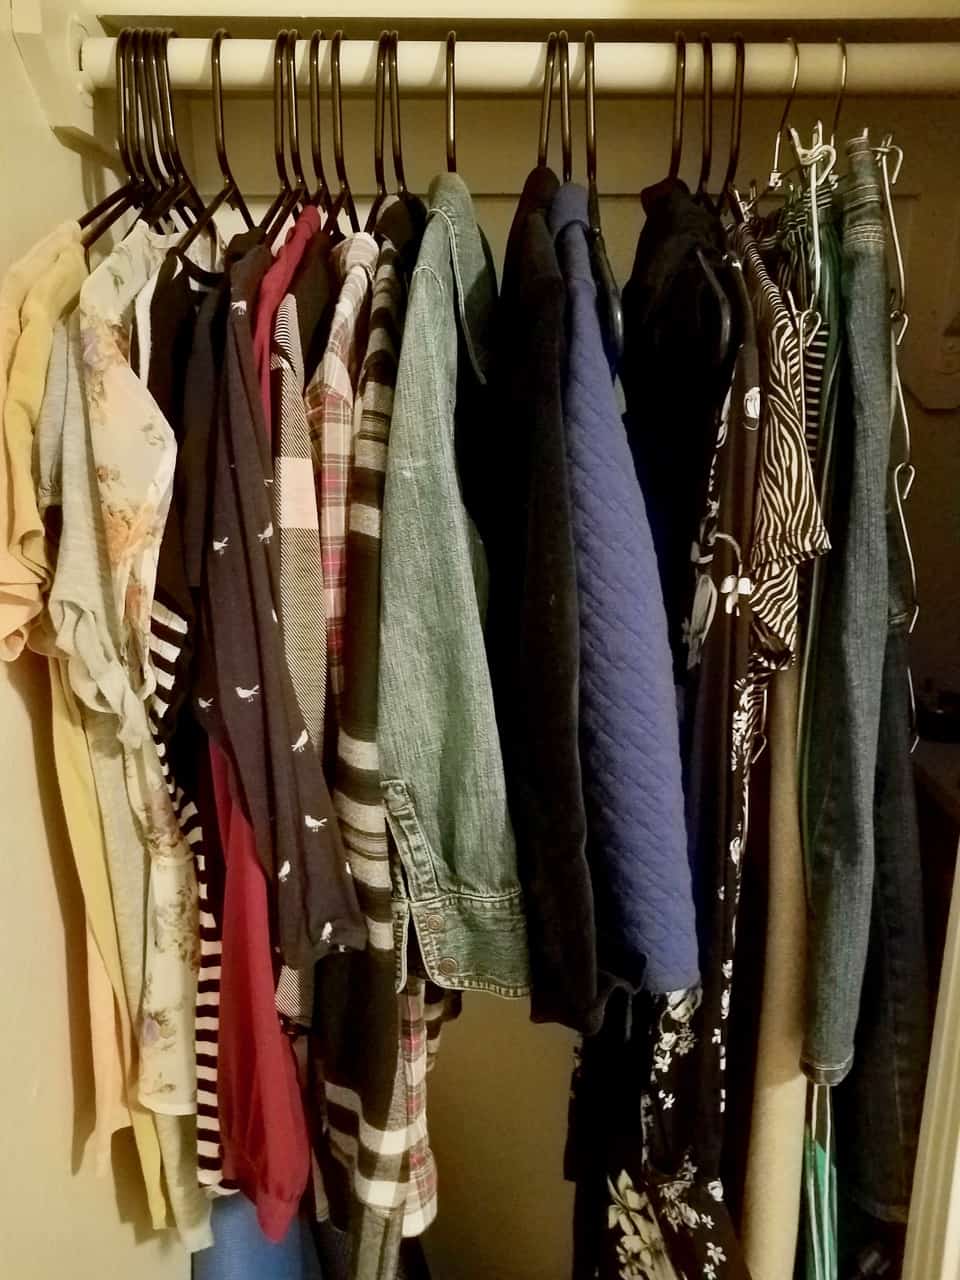 One small rack of clothes hanging in a closet.